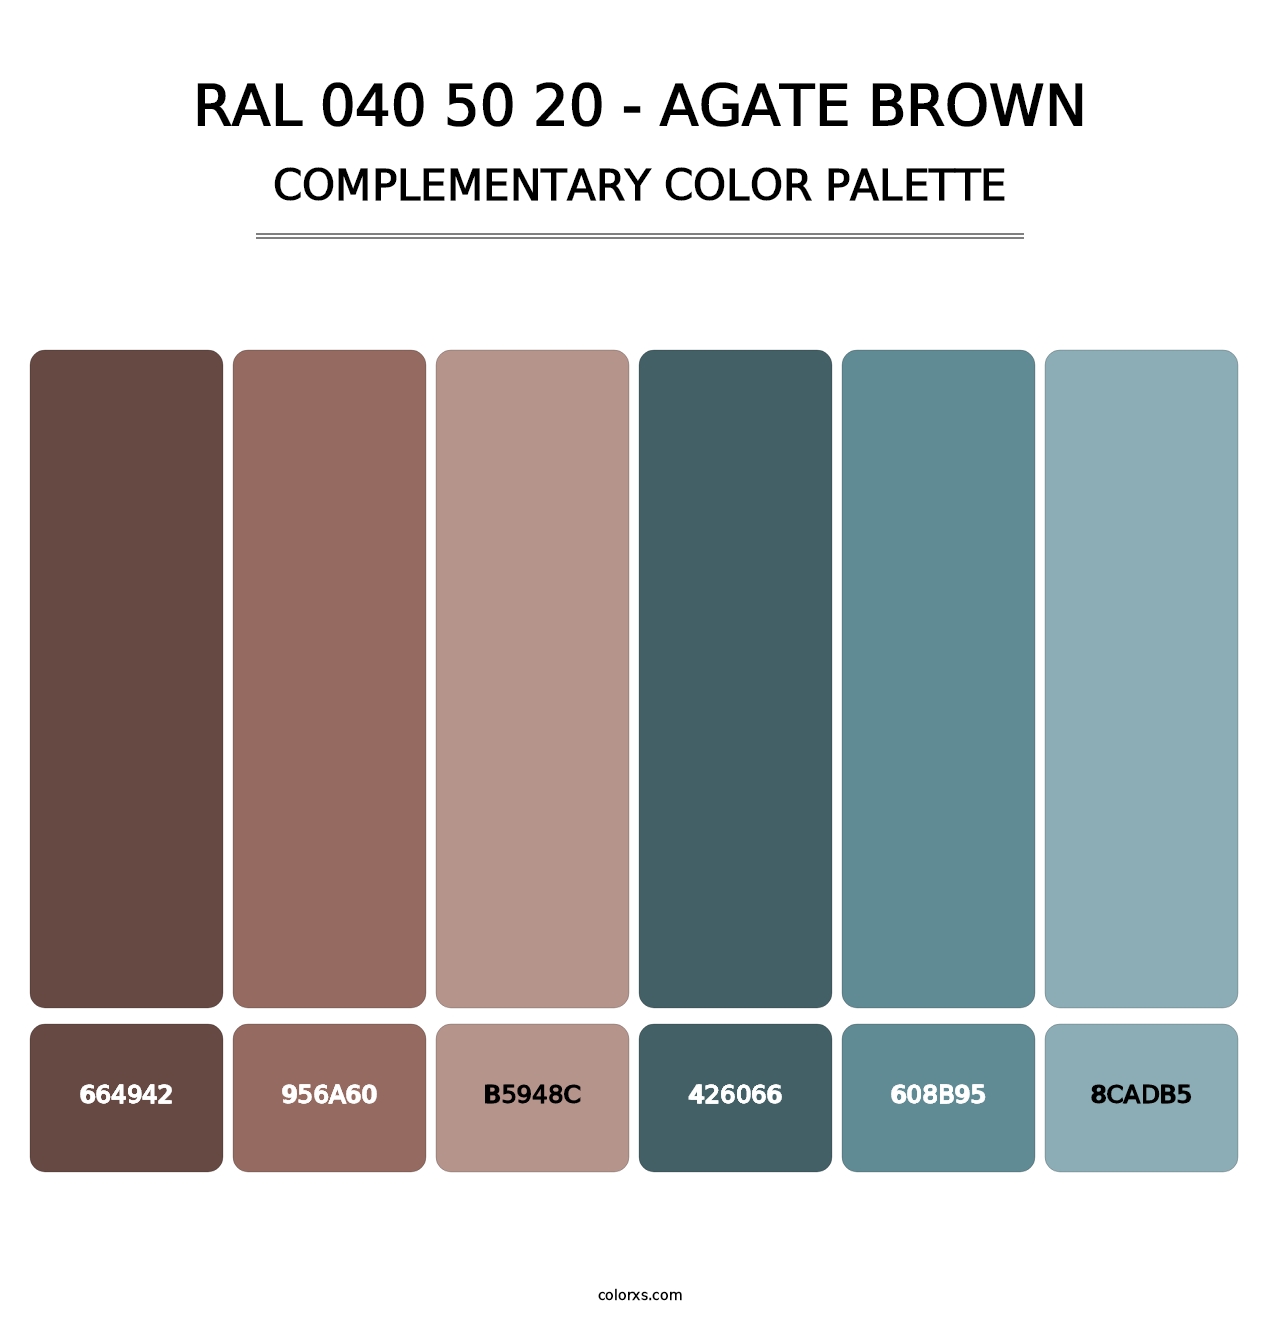 RAL 040 50 20 - Agate Brown - Complementary Color Palette